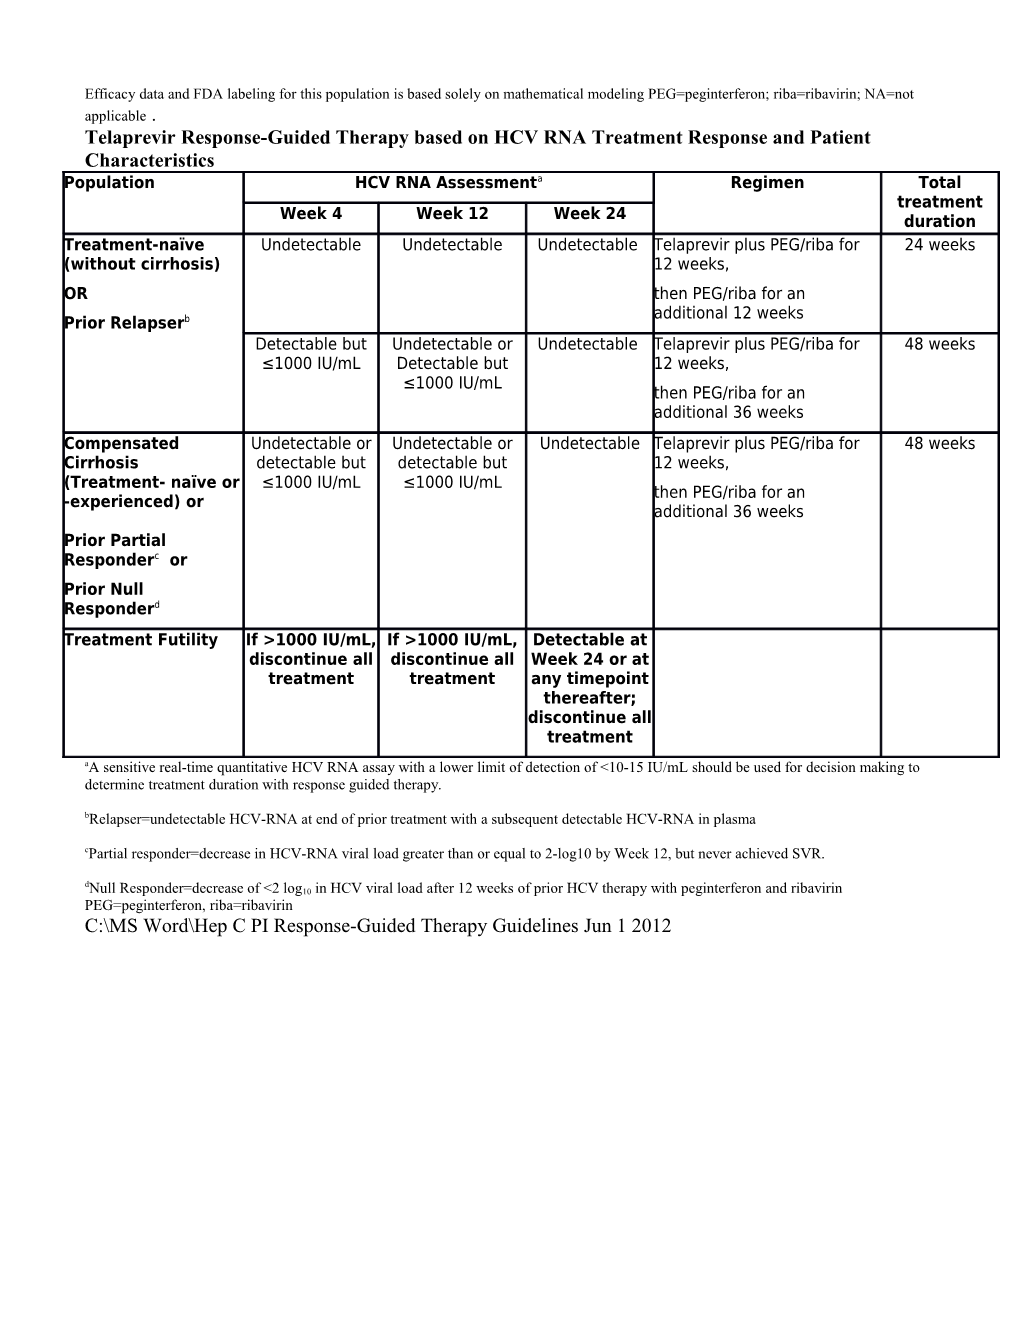 Hep C Protease Inhibitor Response-Guided Therapy (Rgt) Guidelines